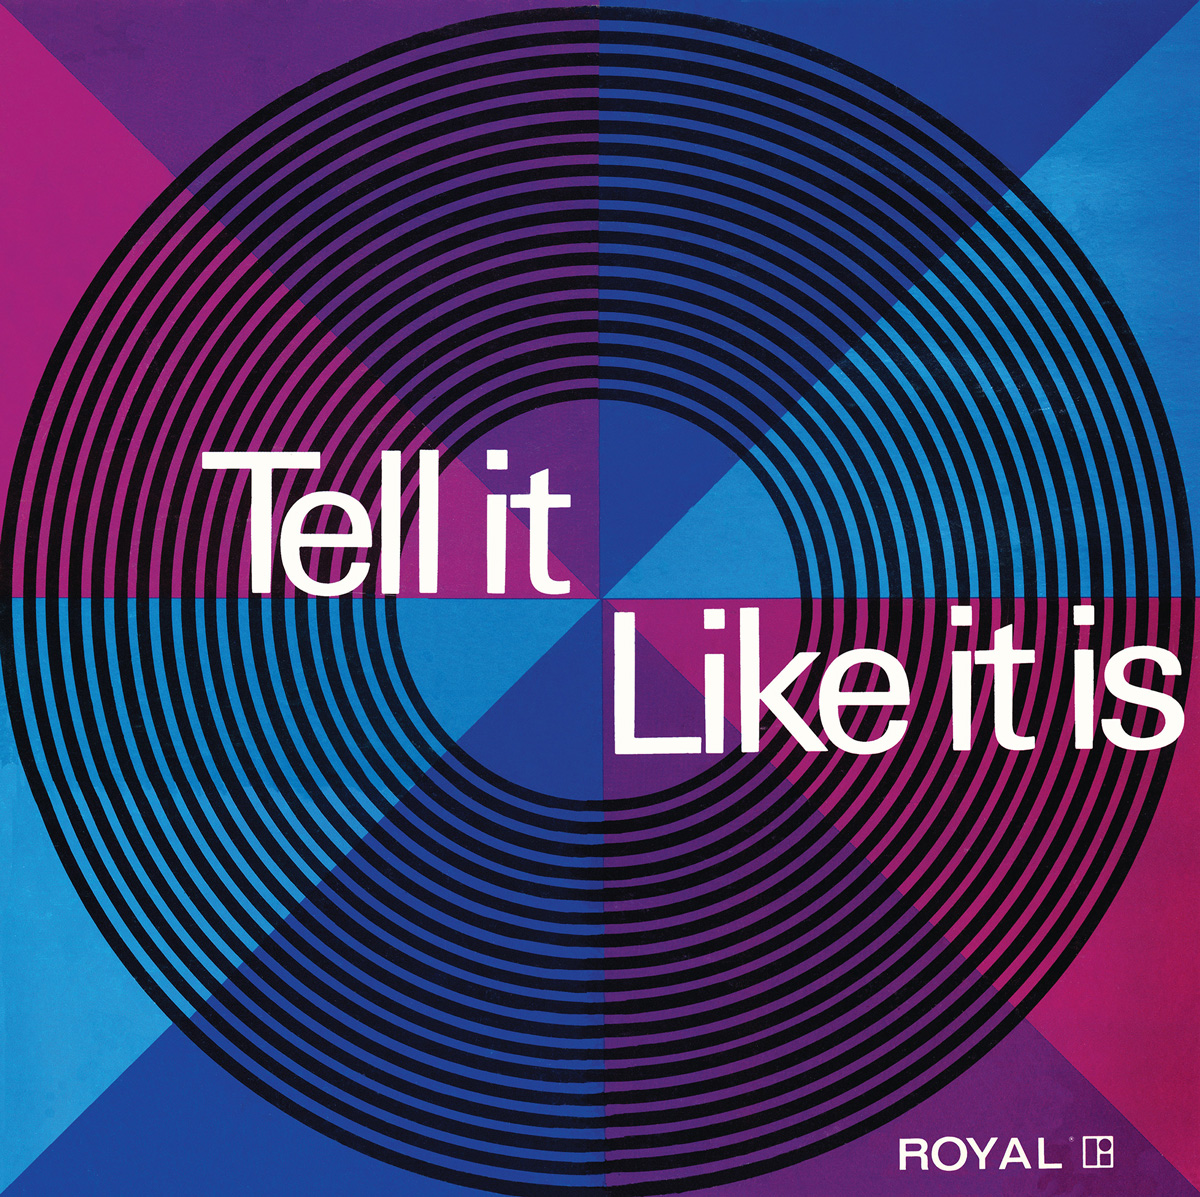 A 1969 album cover for a Royal Typewriter show, titled “Tell It Like It Is.”